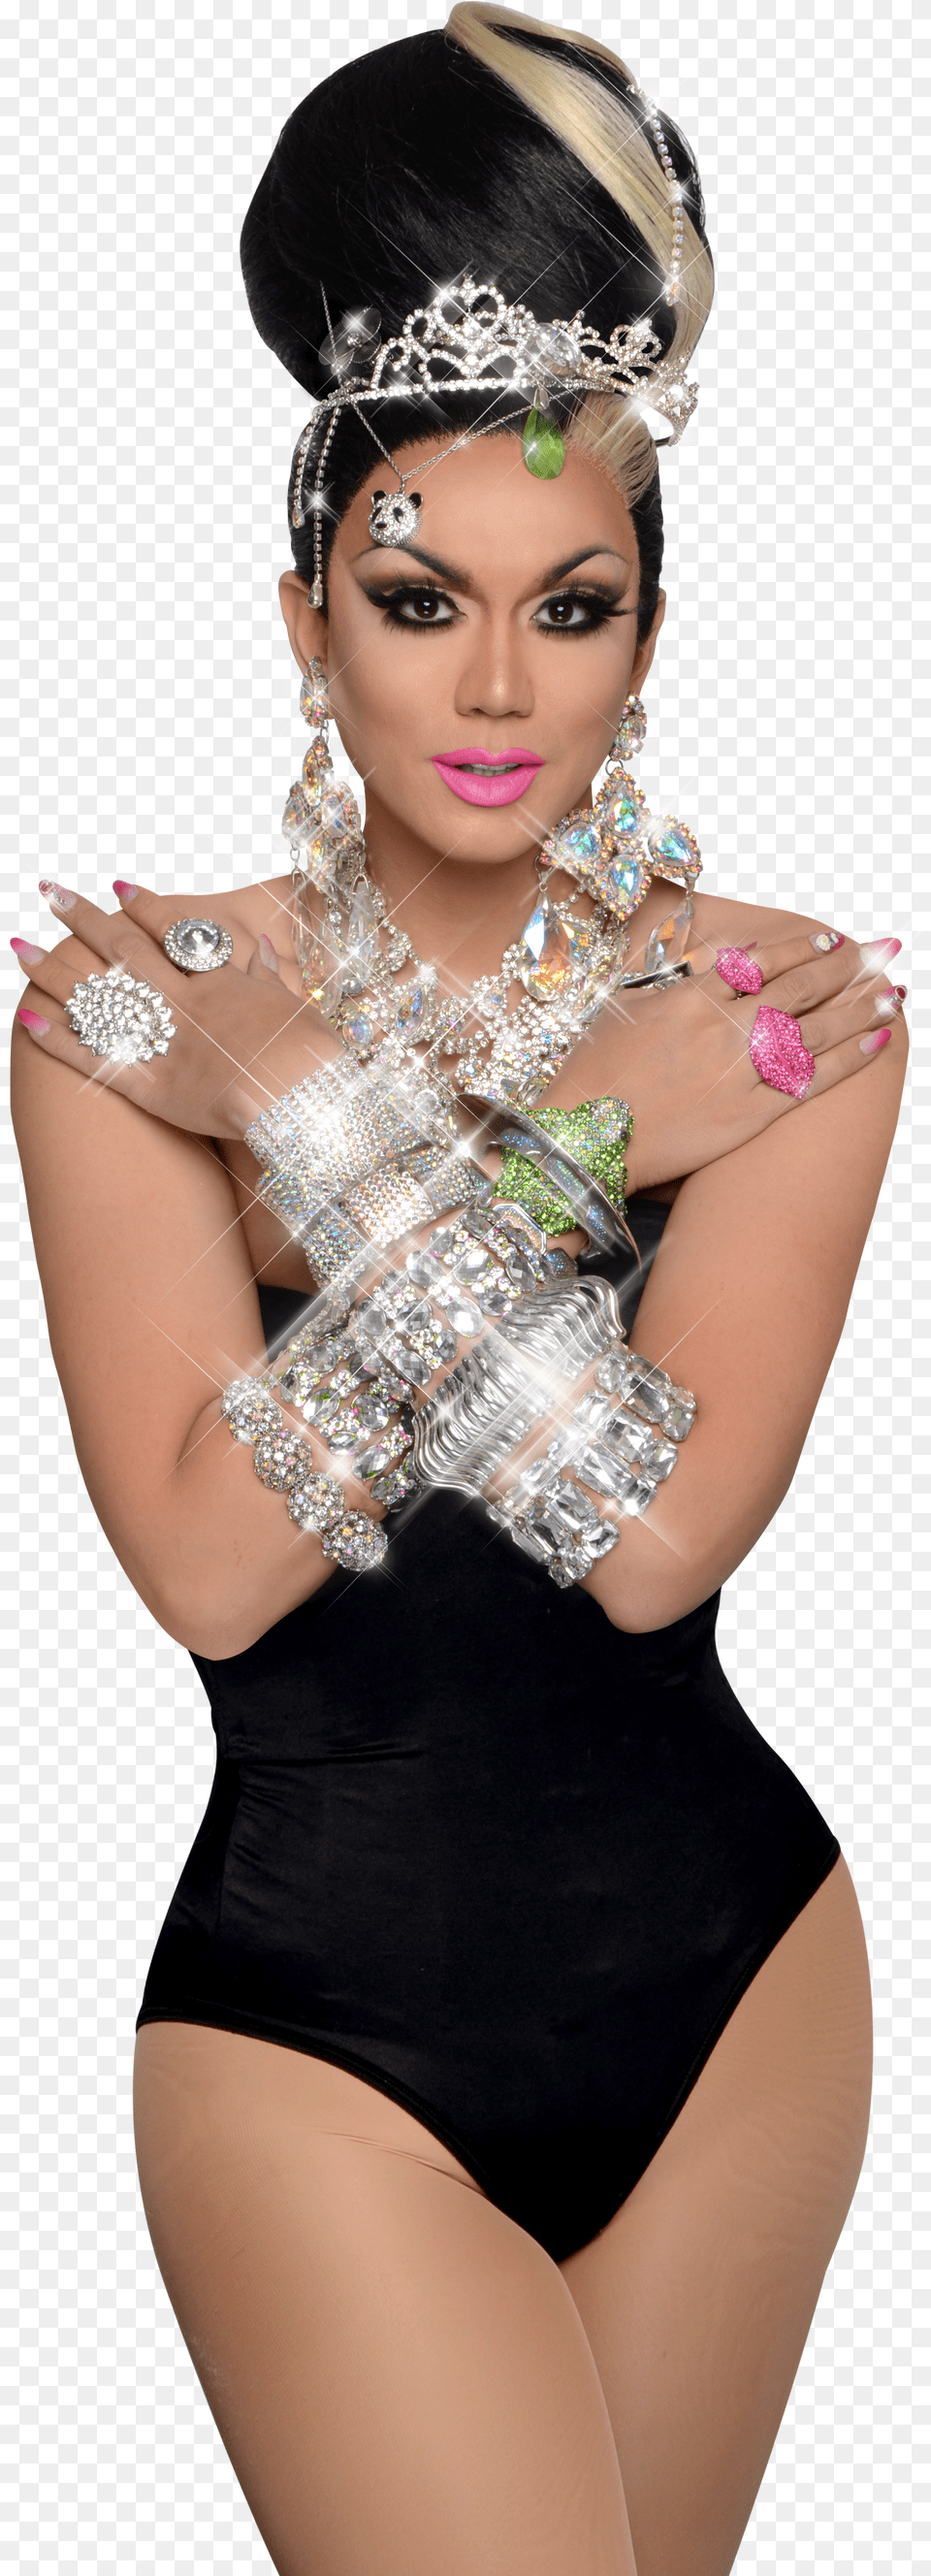 Manila Luzon Drag Queen Free Png Download